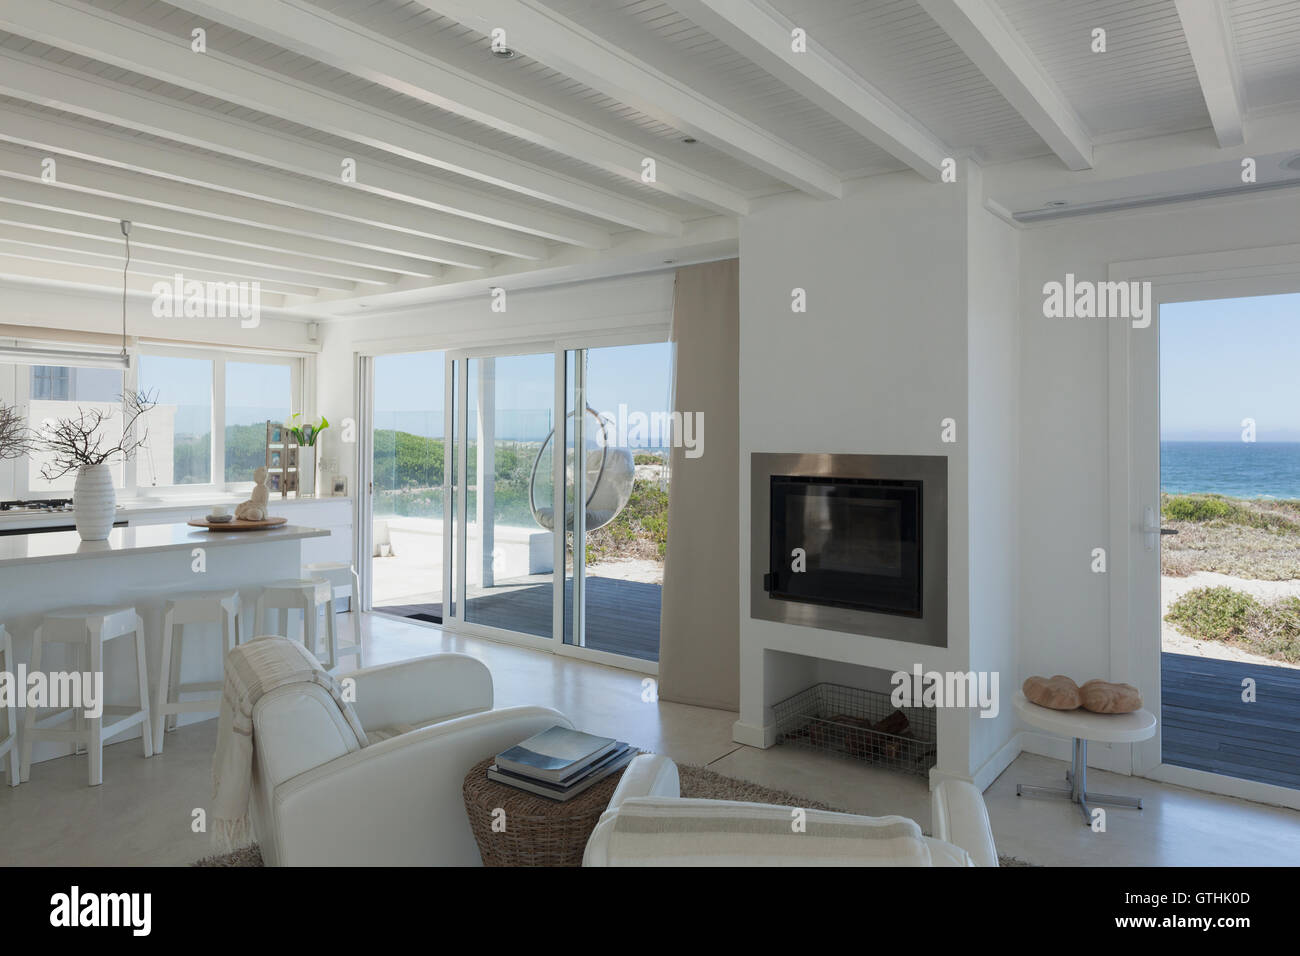 Open floor plan with wood beam ceiling and ocean view Stock Photo